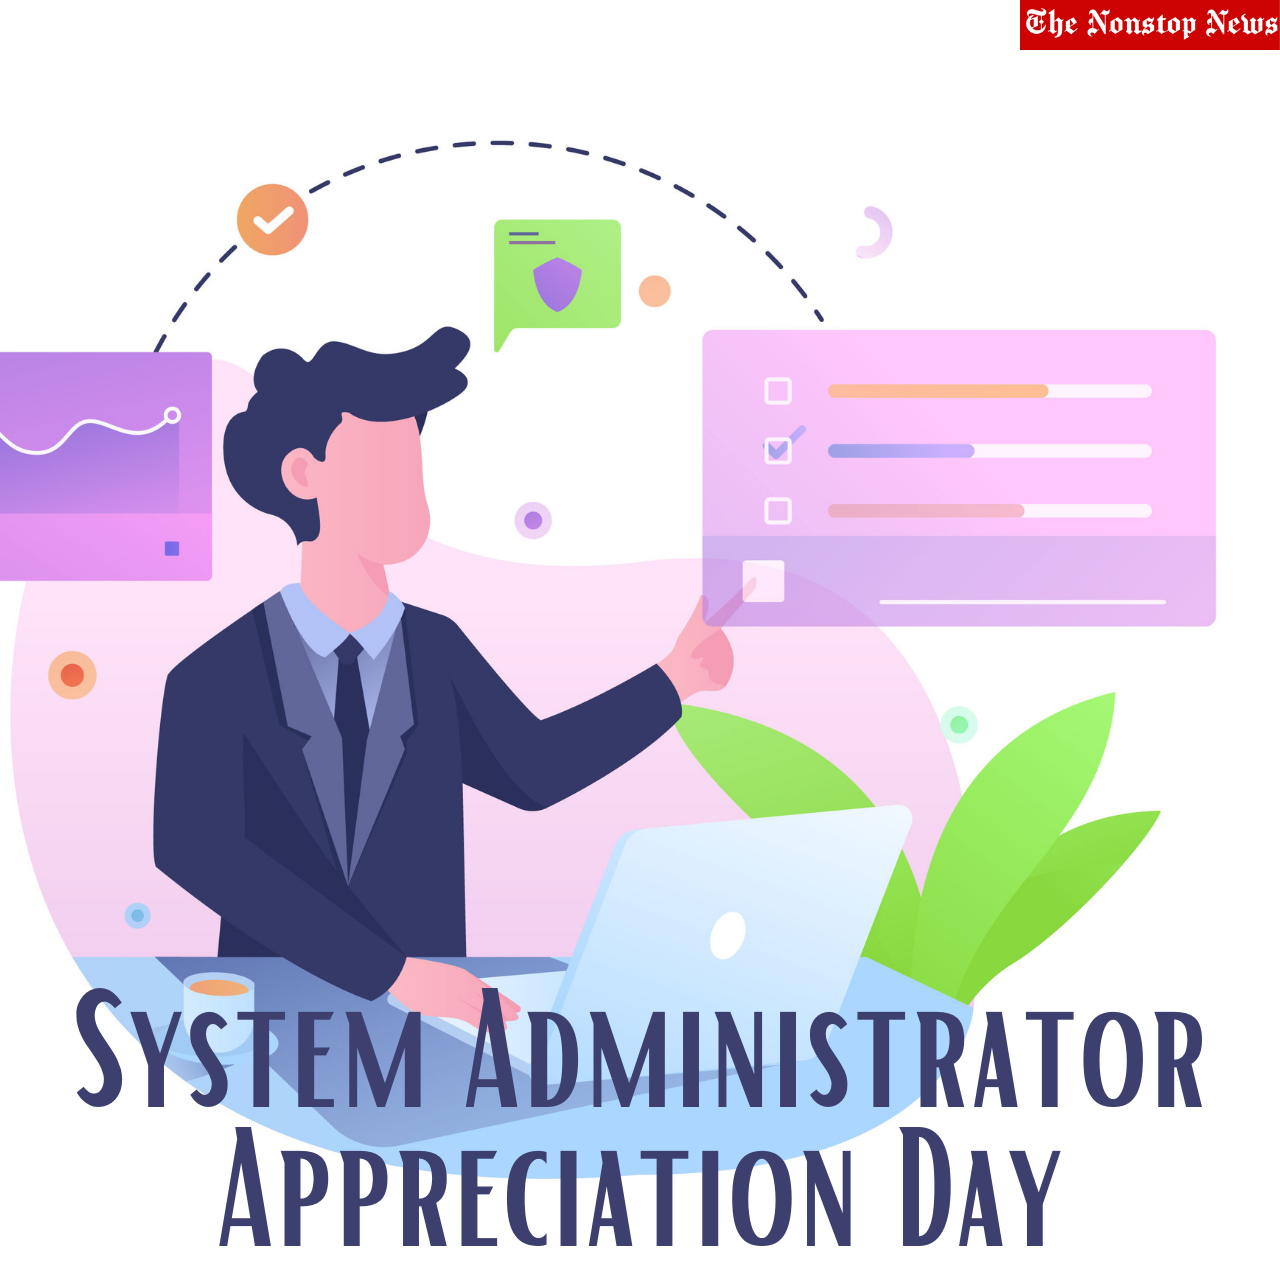 System Administrator Appreciation Day 2021 Quotes and HD Images to show appreciation for the work of sysadmins and other IT workers.